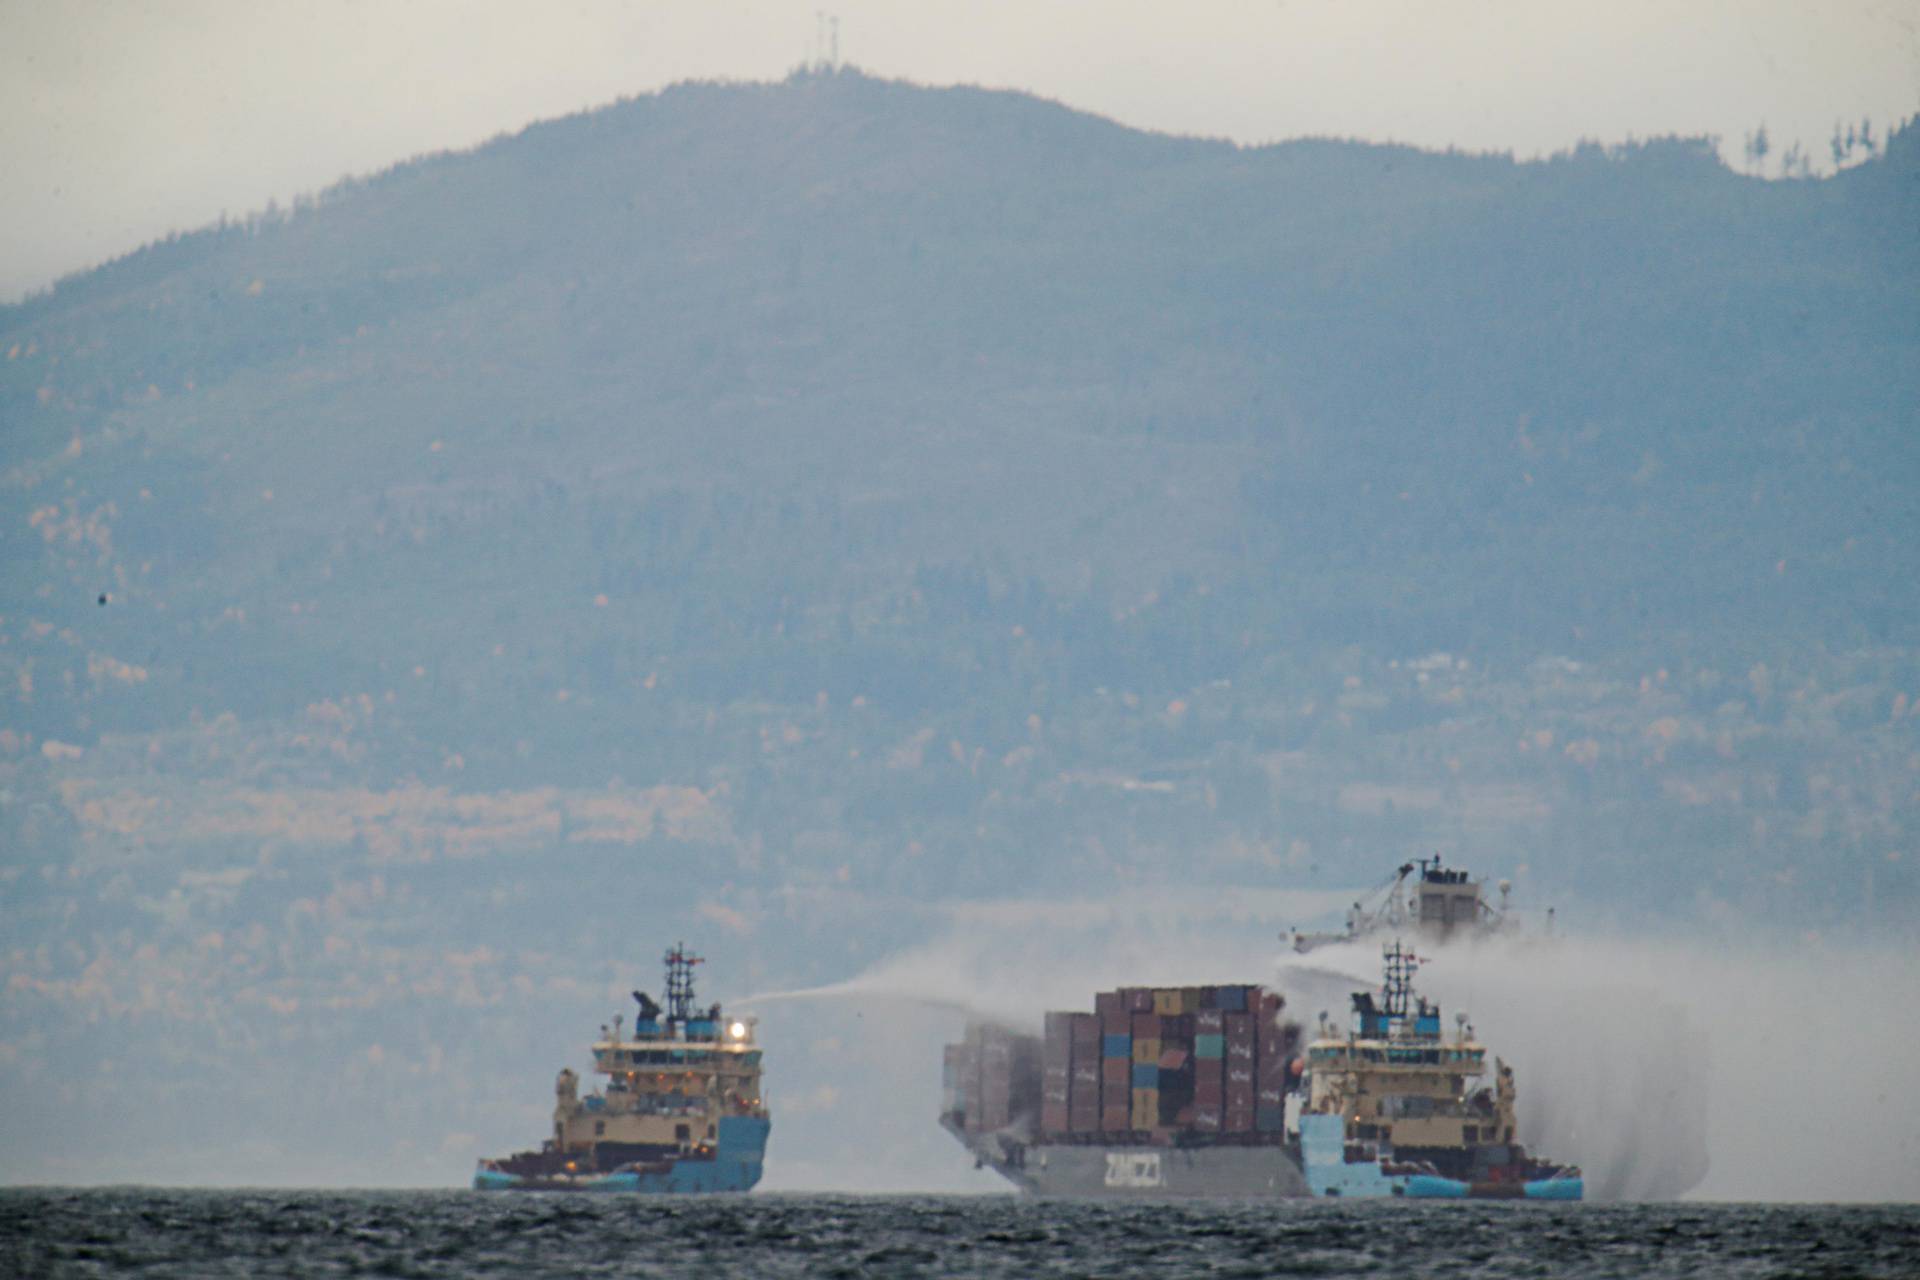 Container ship Zim Kingston evacuated due to a fire on board near Victoria